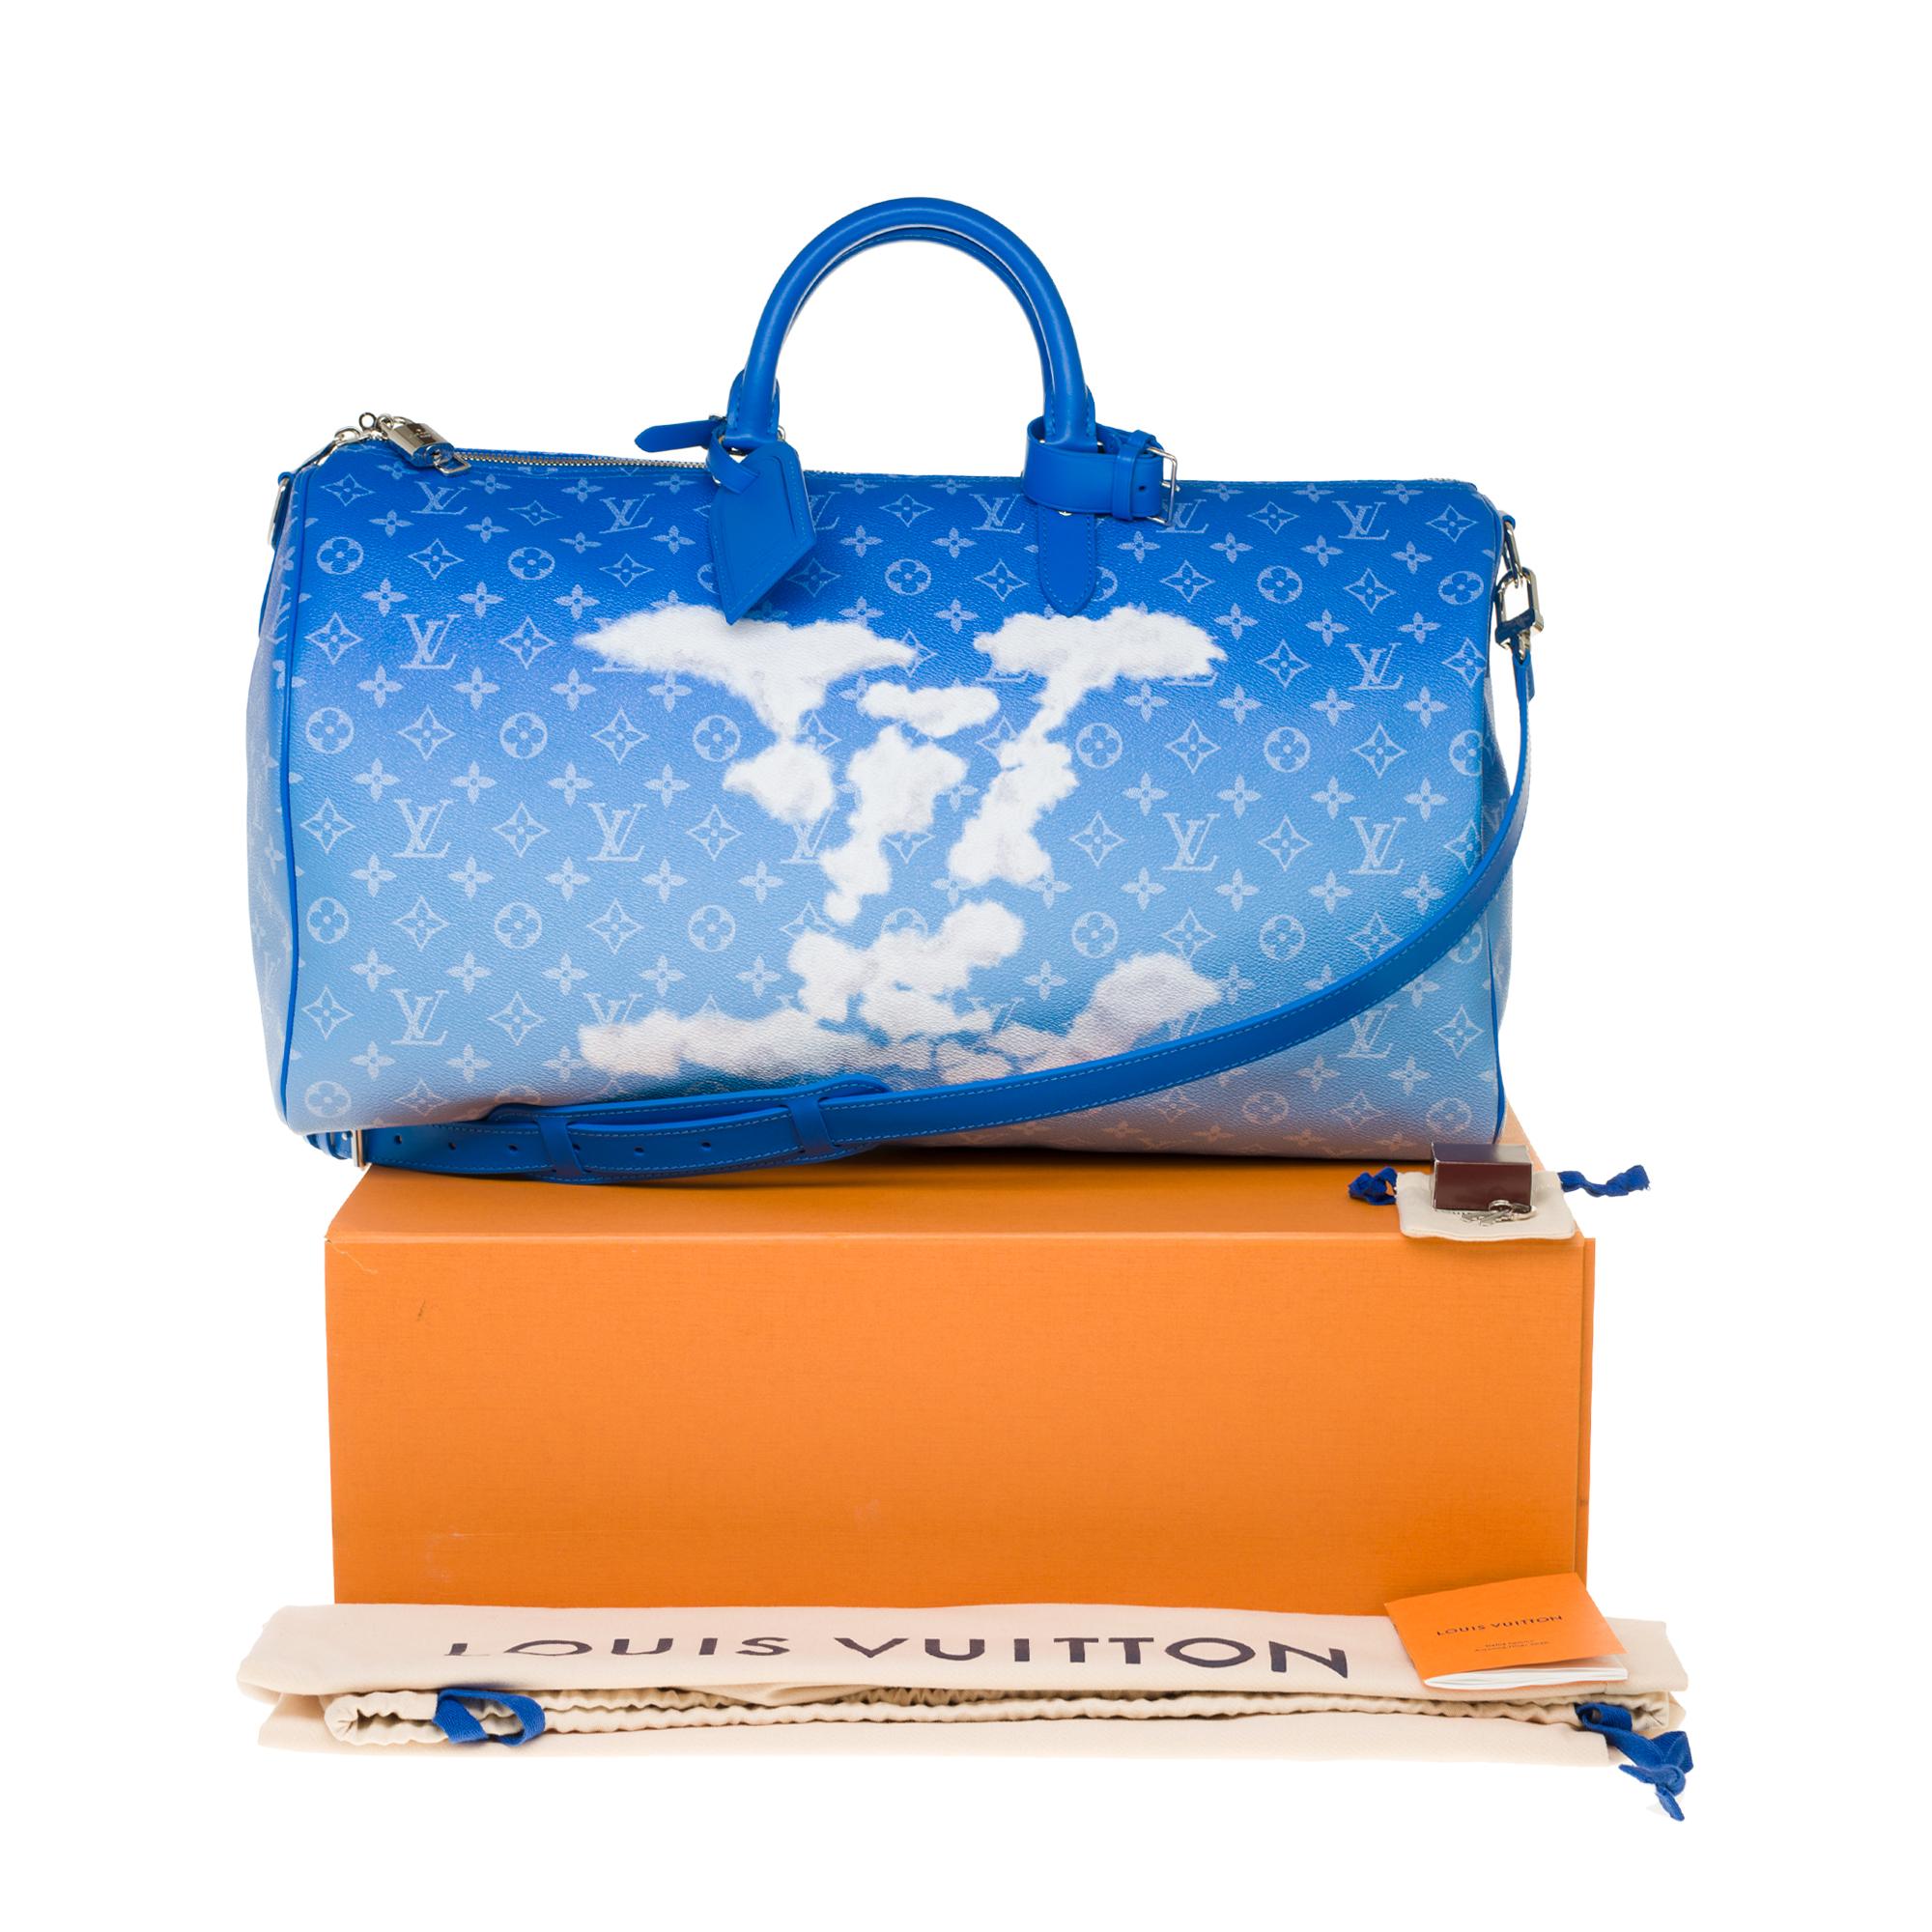 ULTRA EXCLUSIVE COLLECTION


Louis Vuitton’s classic Keepall takes to the skies with this dreamlike Clouds version by Virgil Abloh for Fall-Winter 2020-21. Monogram canvas in gradients of blue is enhanced with oversized LV Initials, like skywriting